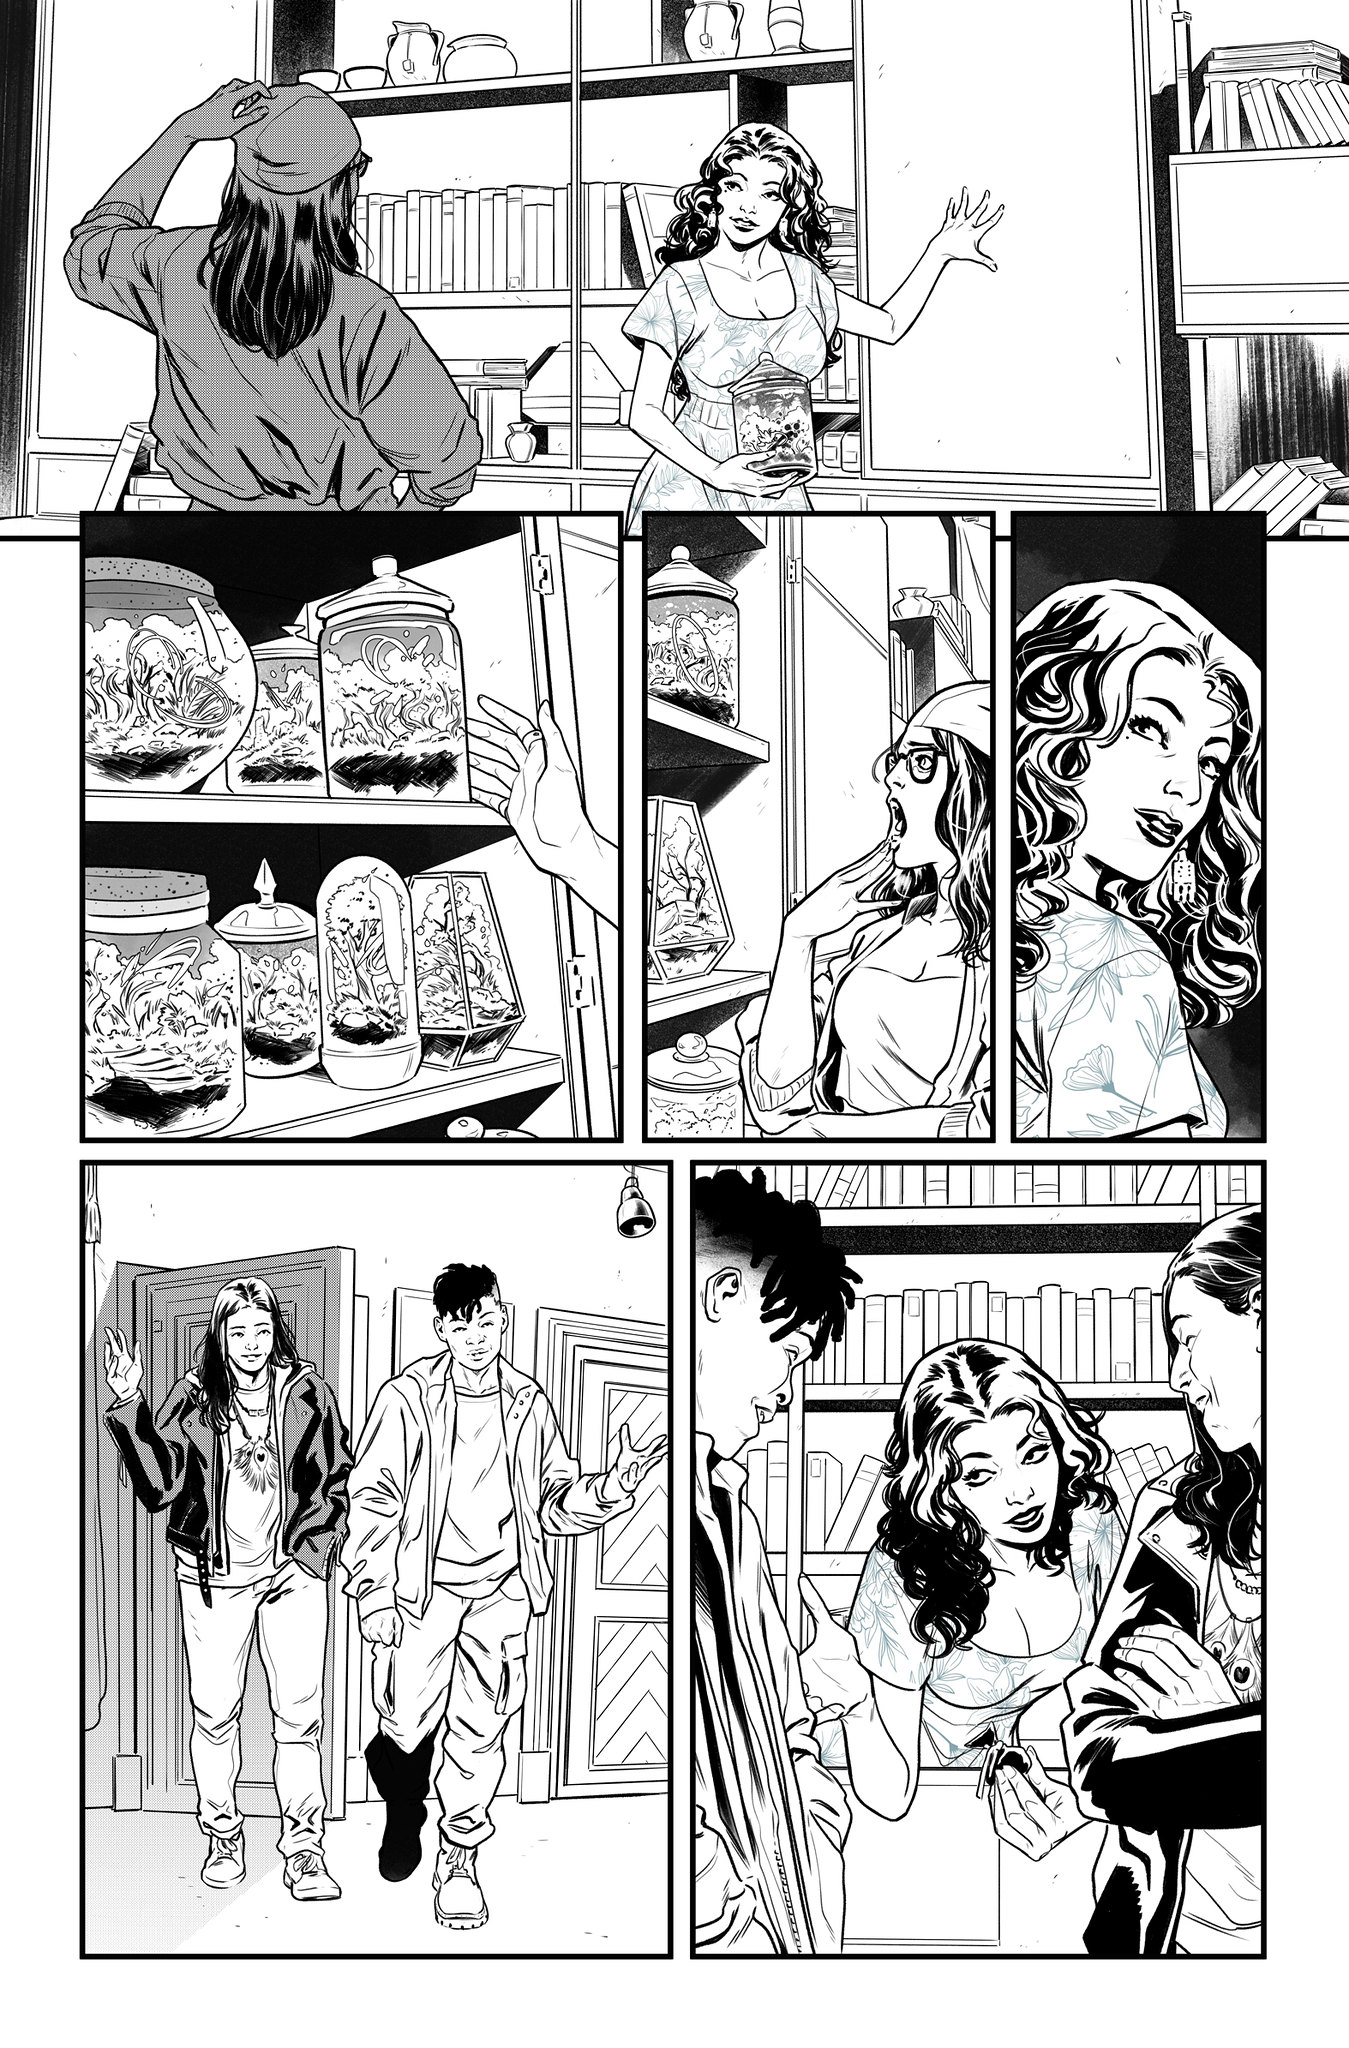 SCARLET_WITCH_ANNUAL_PAGE3_INKS